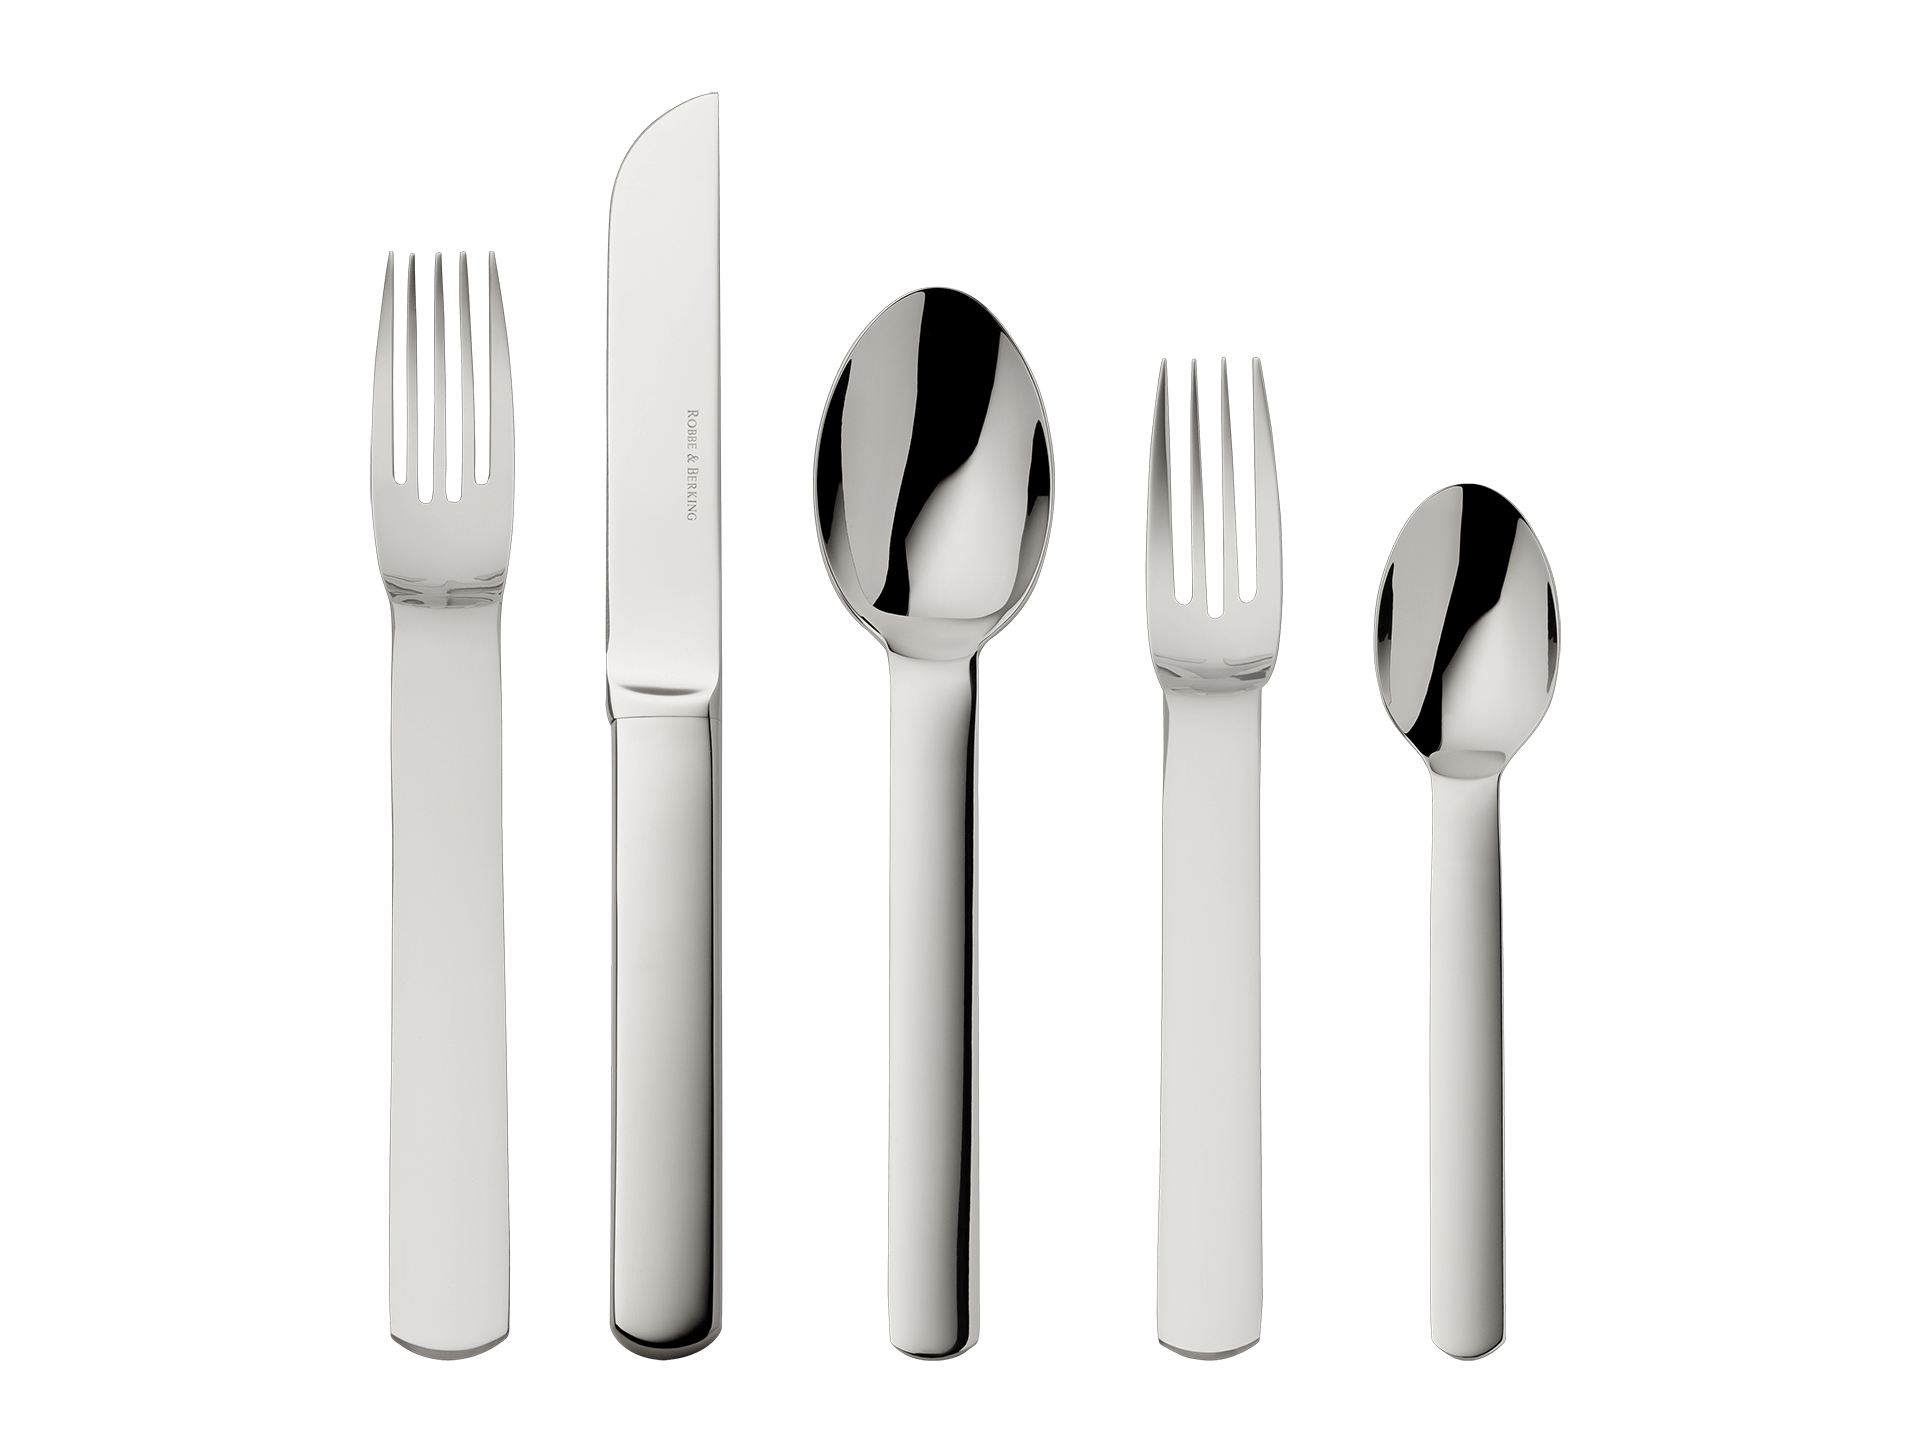 Topos 5-piece place setting (18/8 stainless steel)